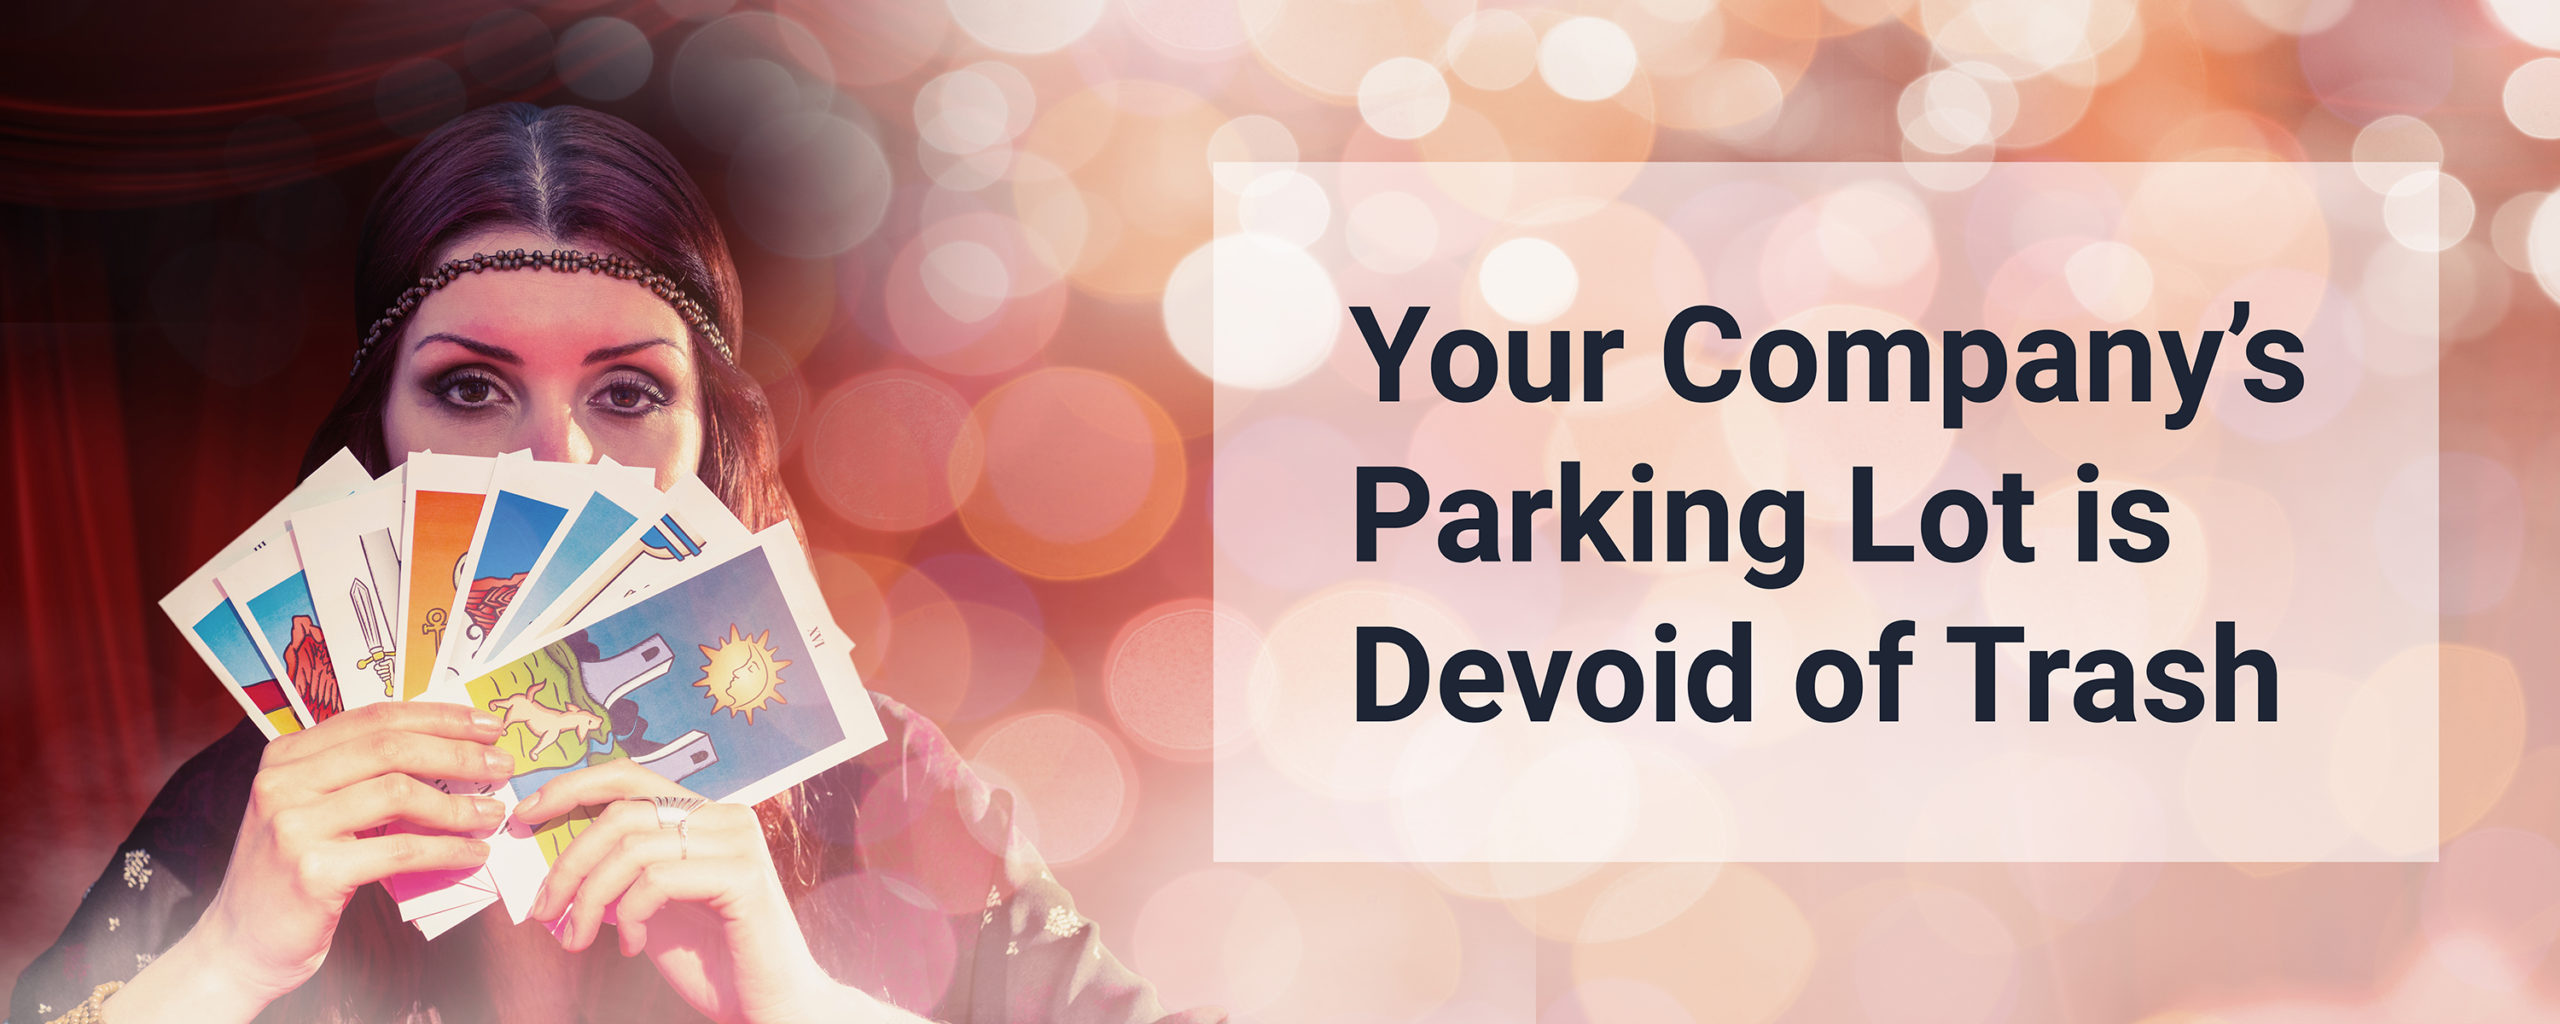 Your Company's Parking Lot is Devoid of Trash